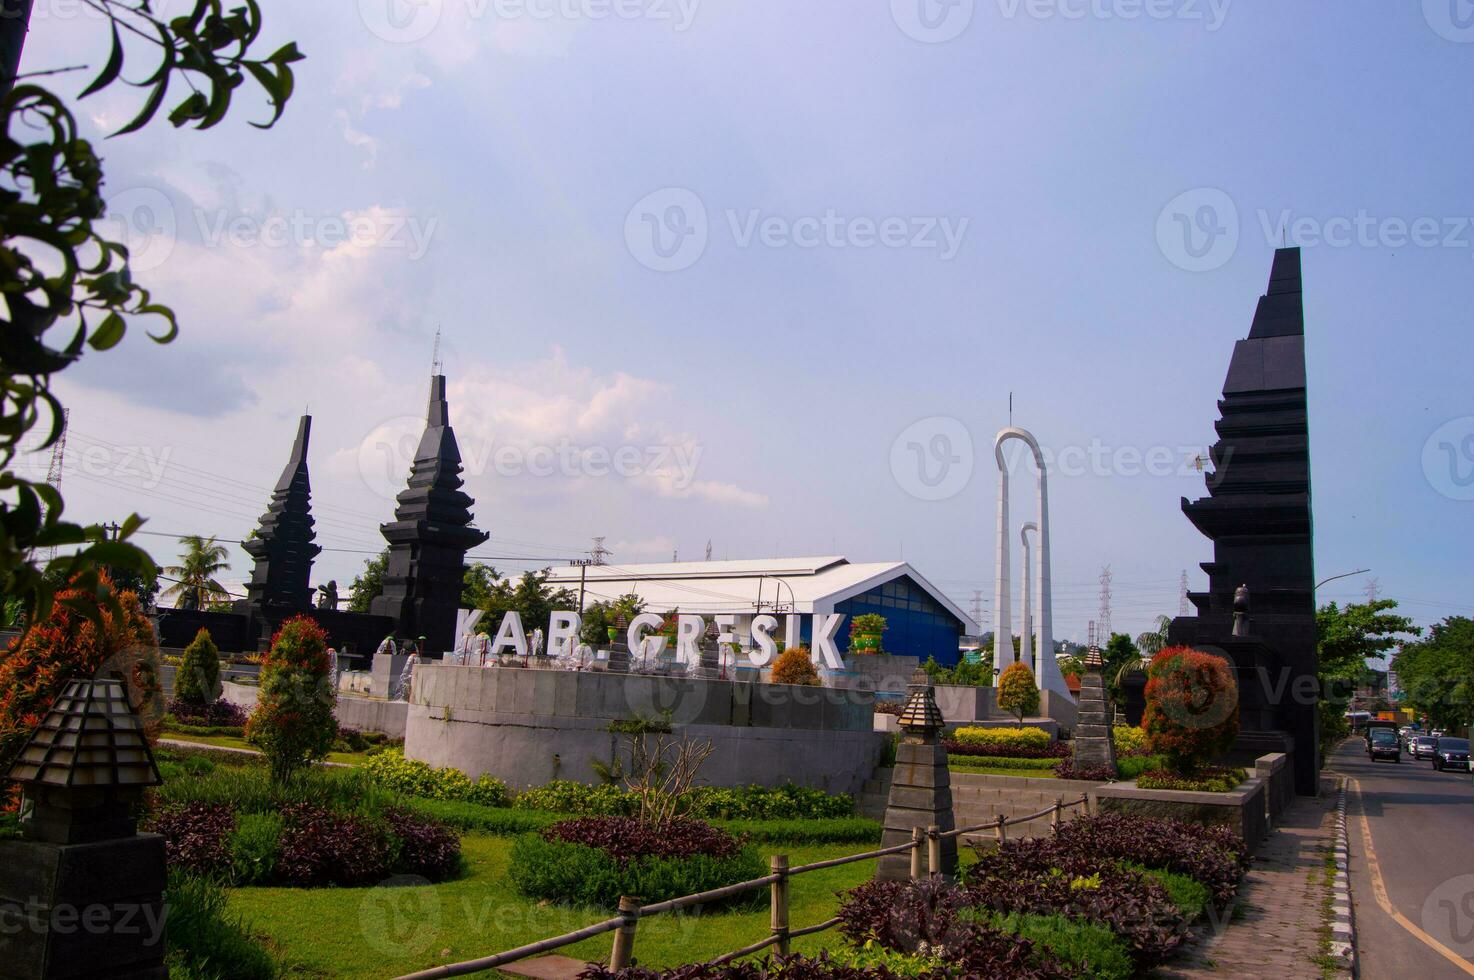 view of the garden on the Gresik border photo